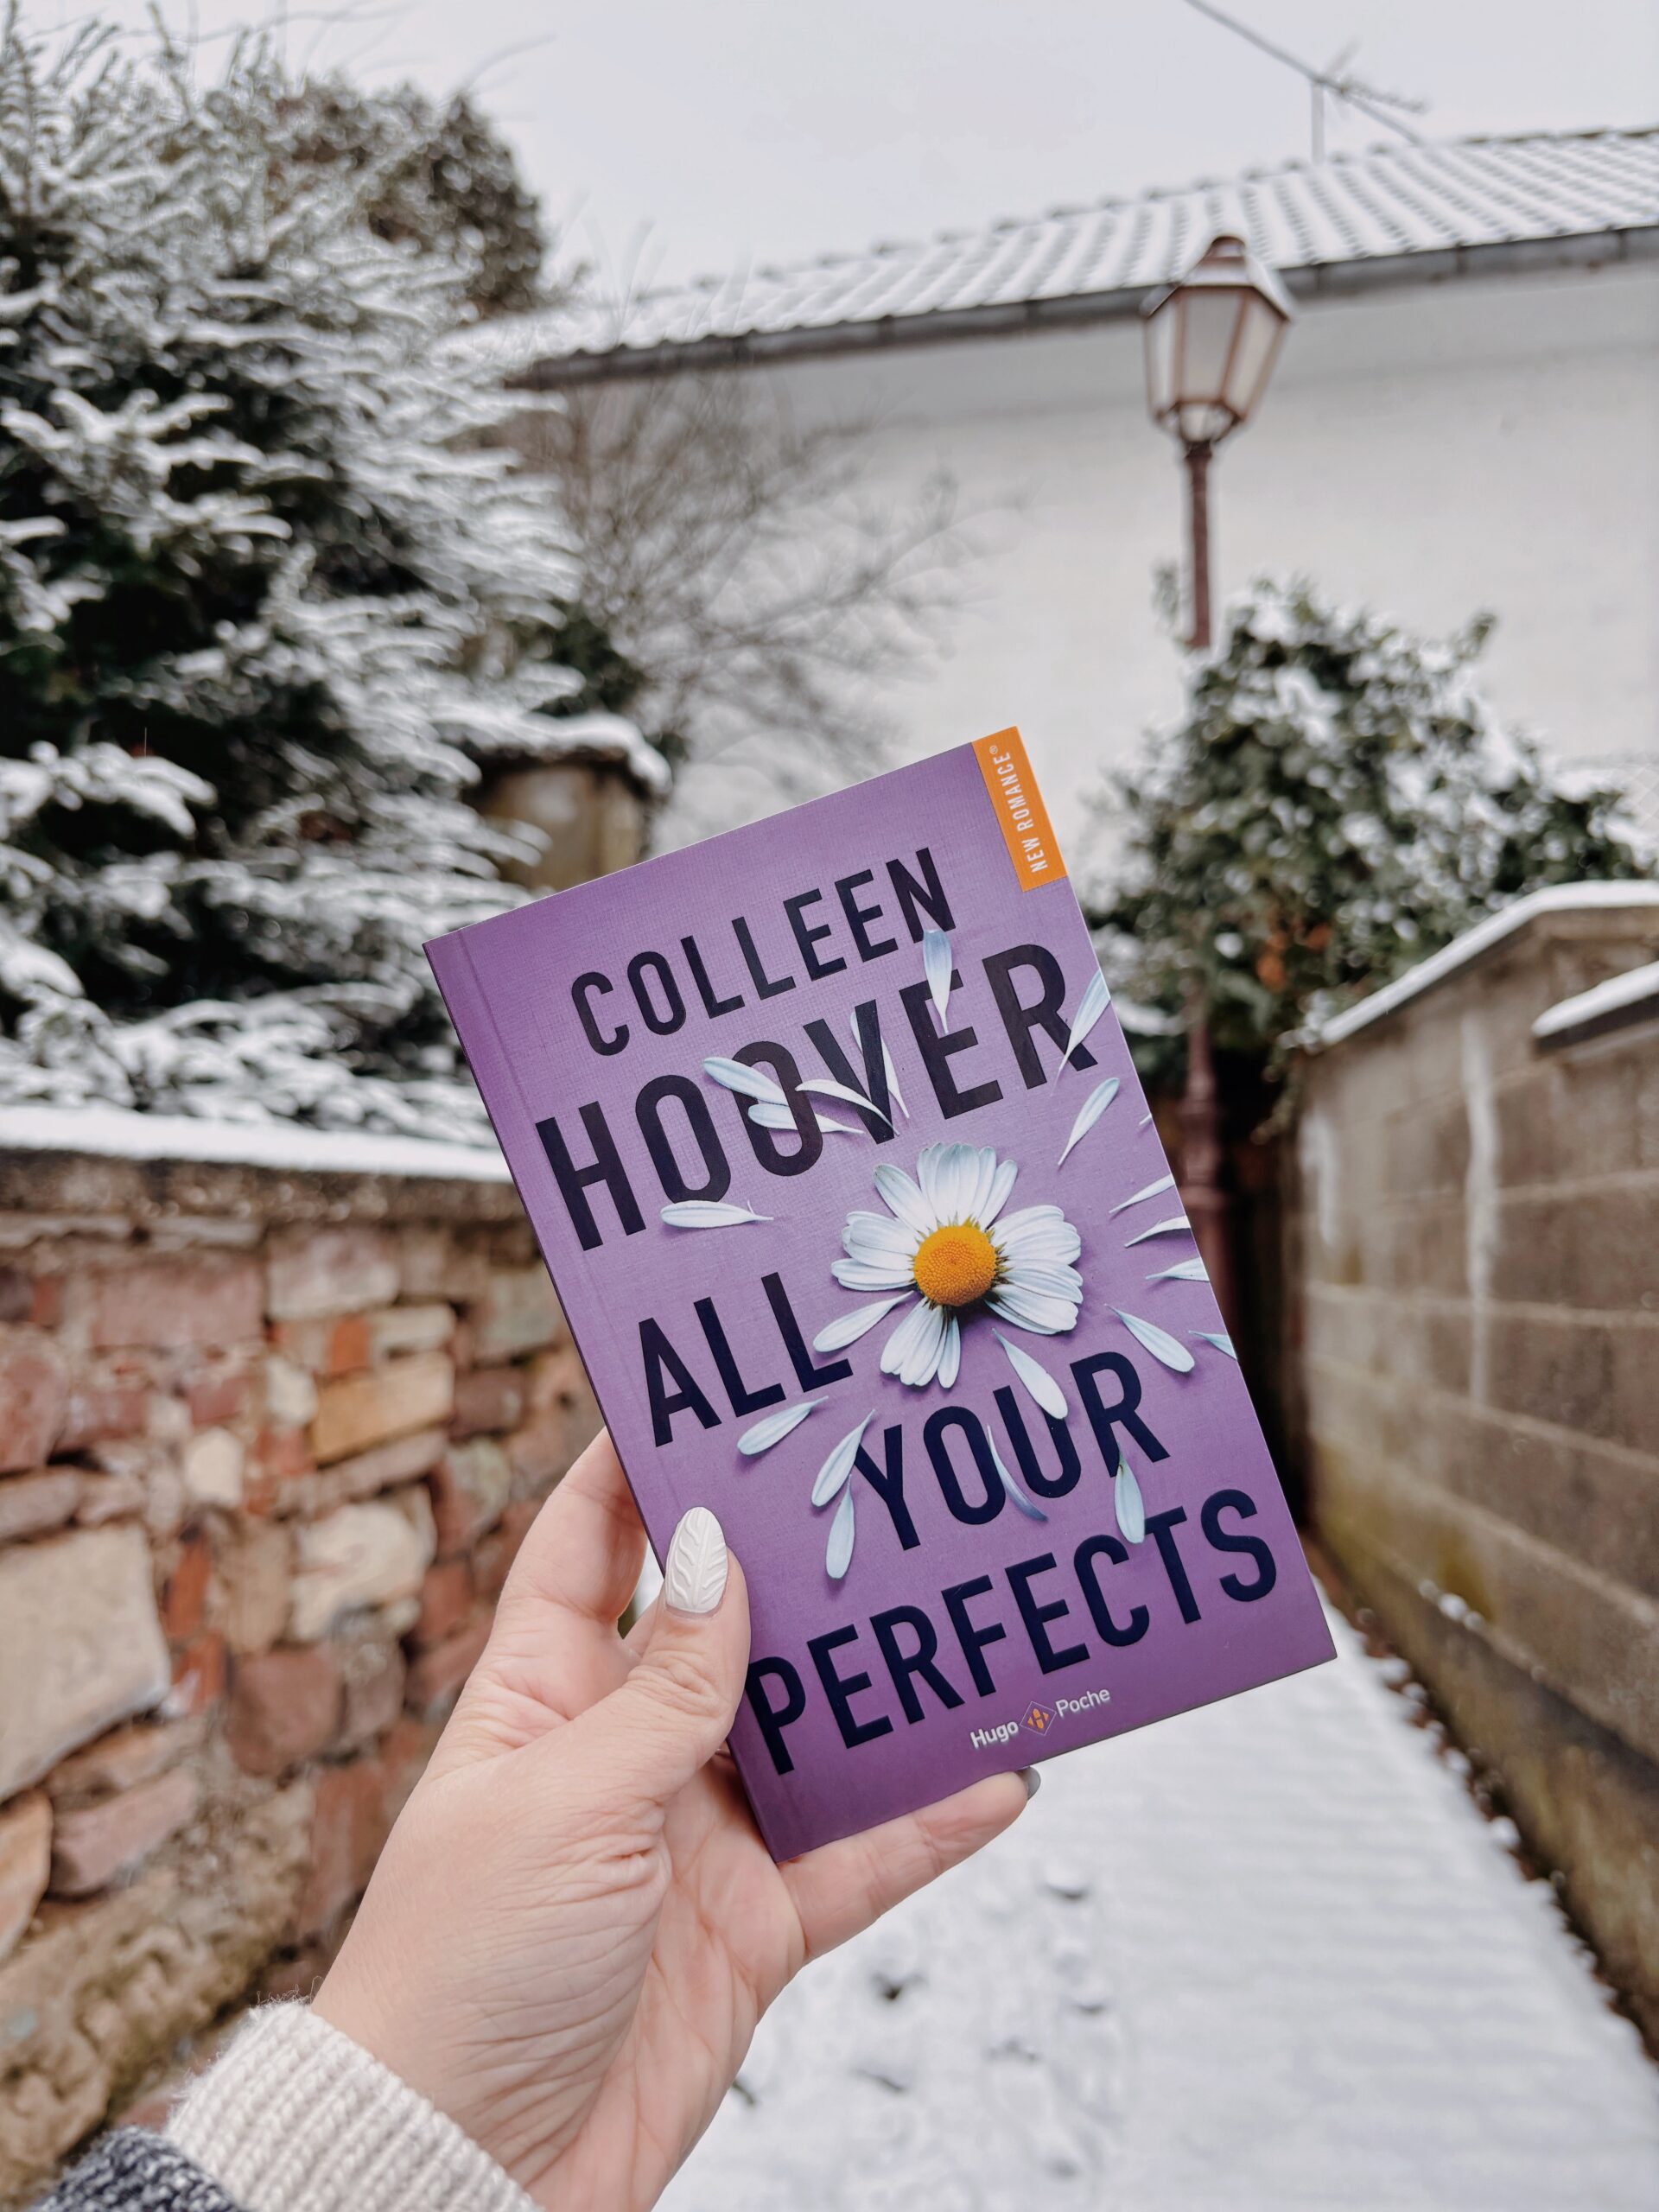 All your perfects Colleen Hoover